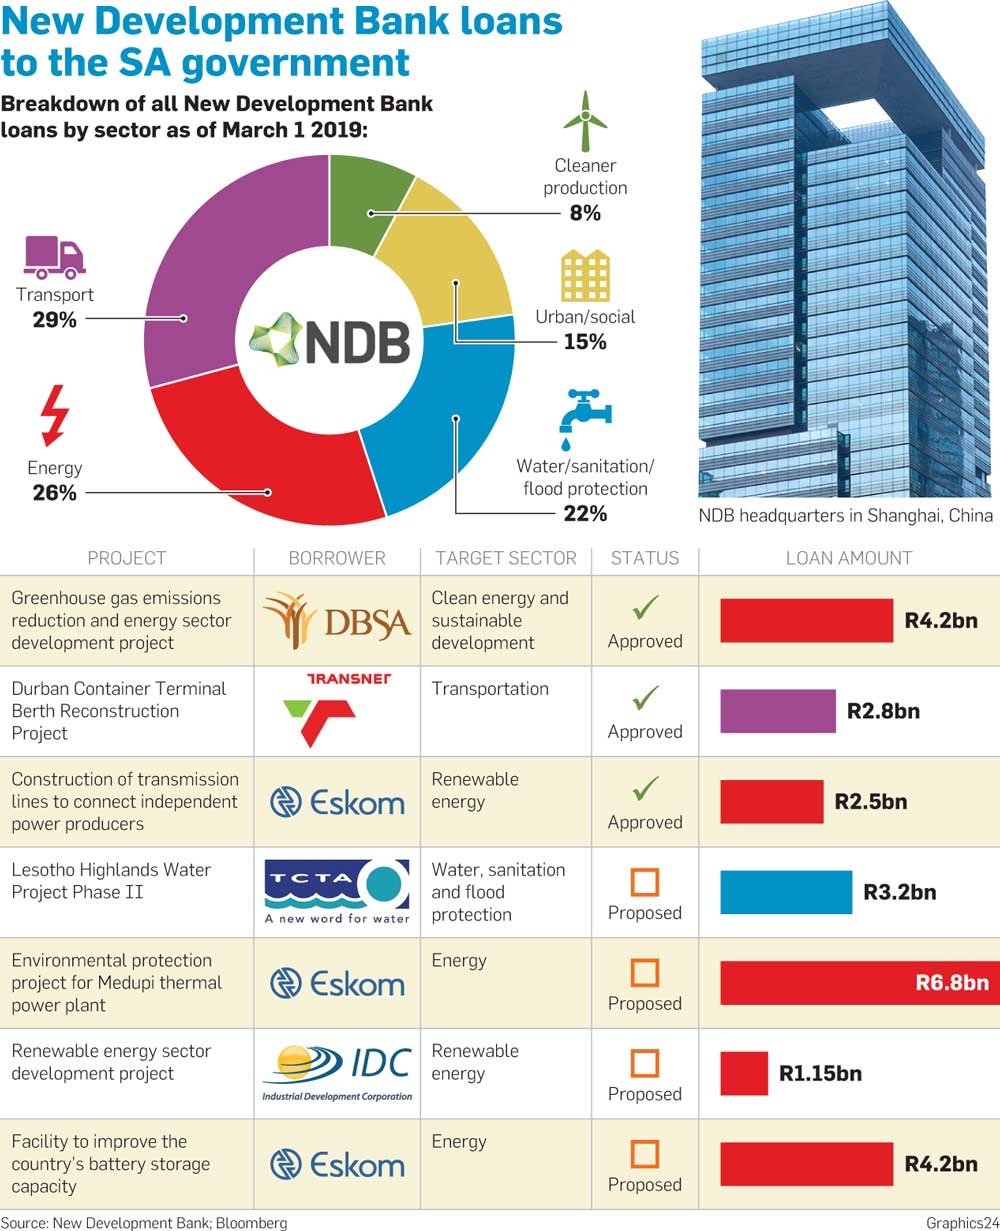 New Development Bank loans to the South African government